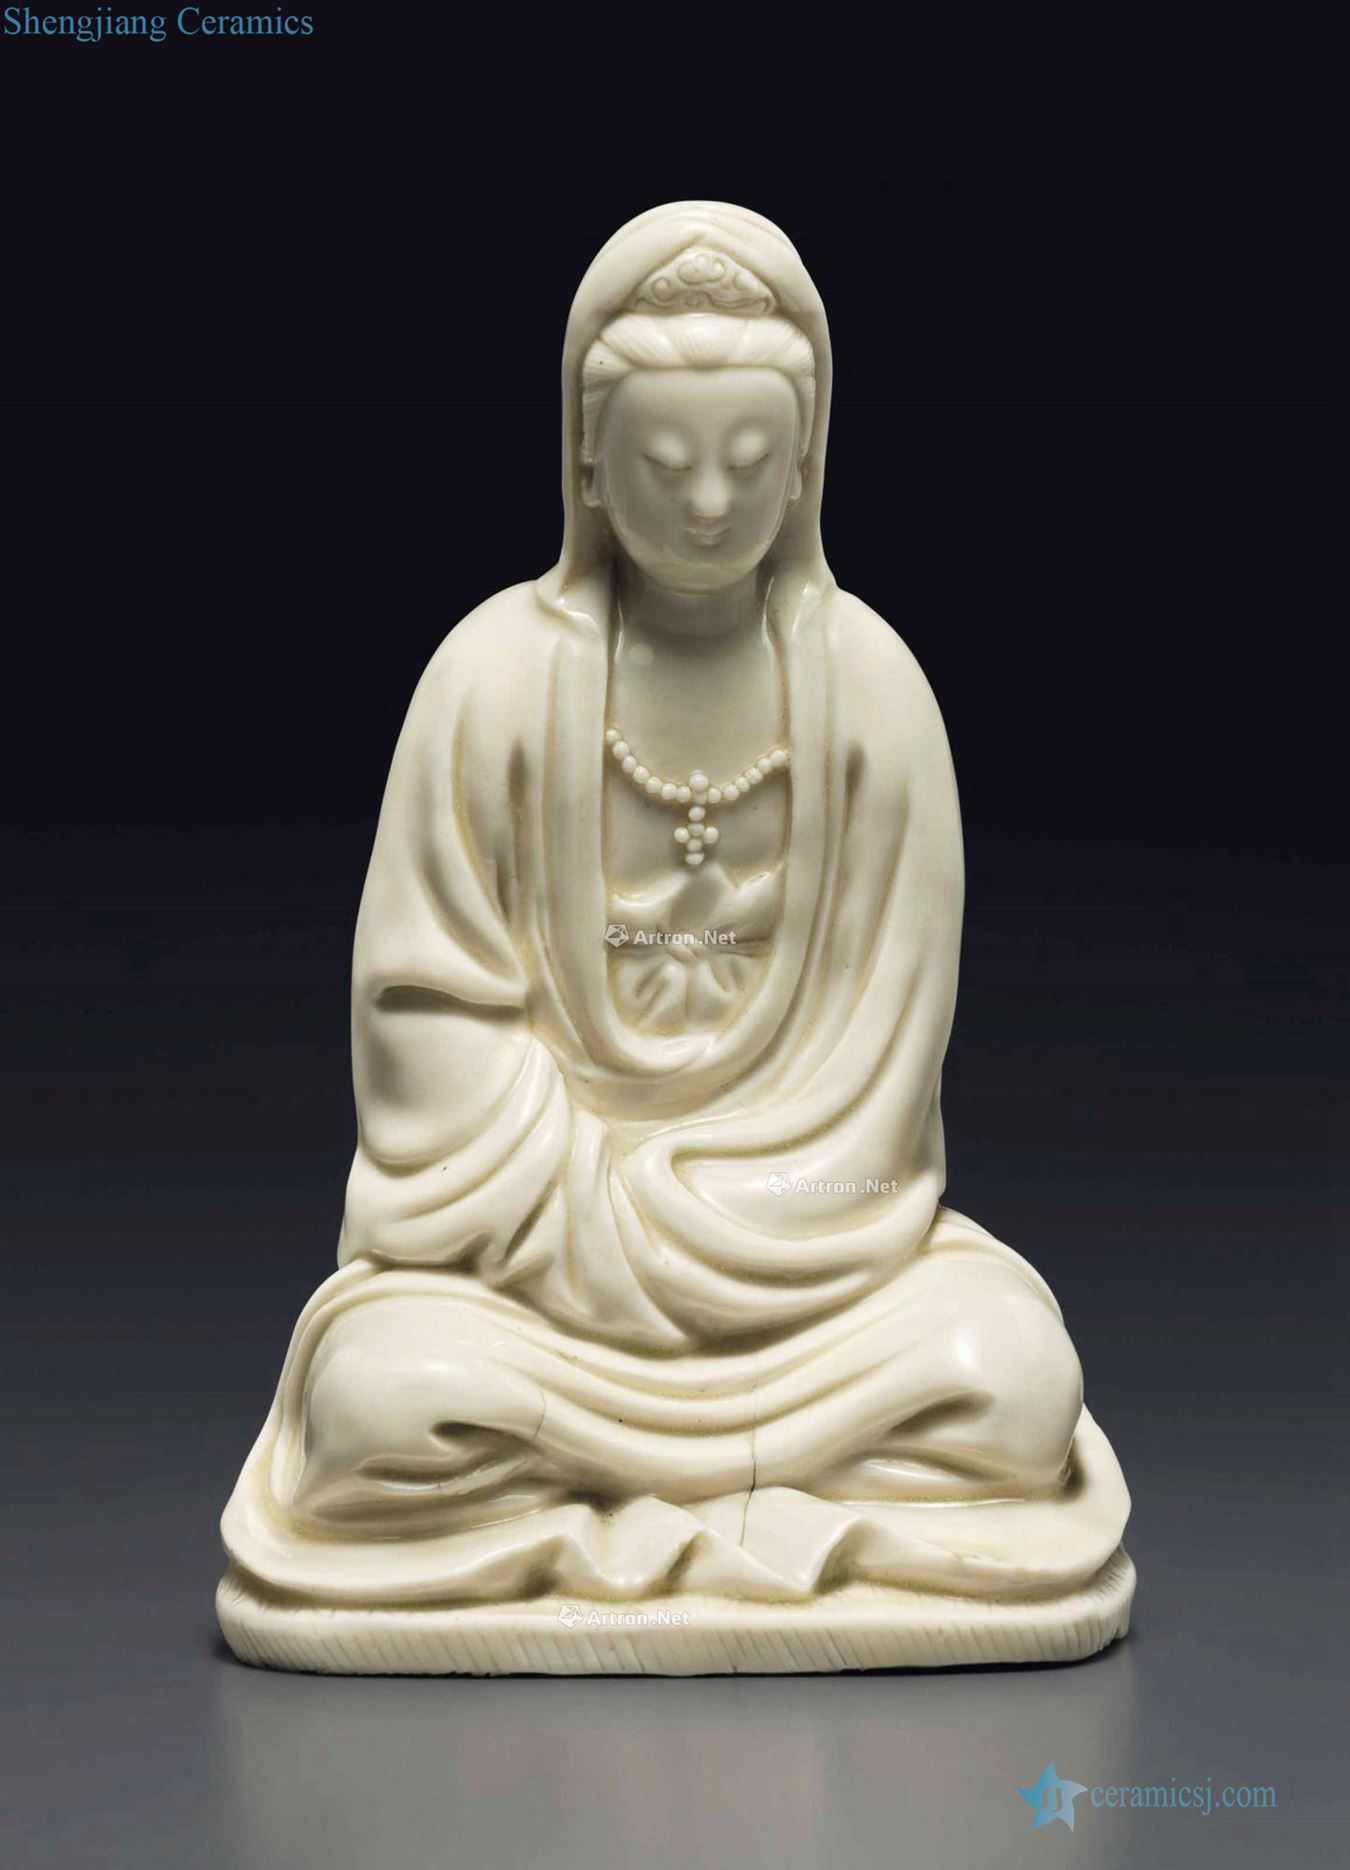 Late Ming dynasty, the early 17th century A DEHUA FIGURE OF GUANYIN